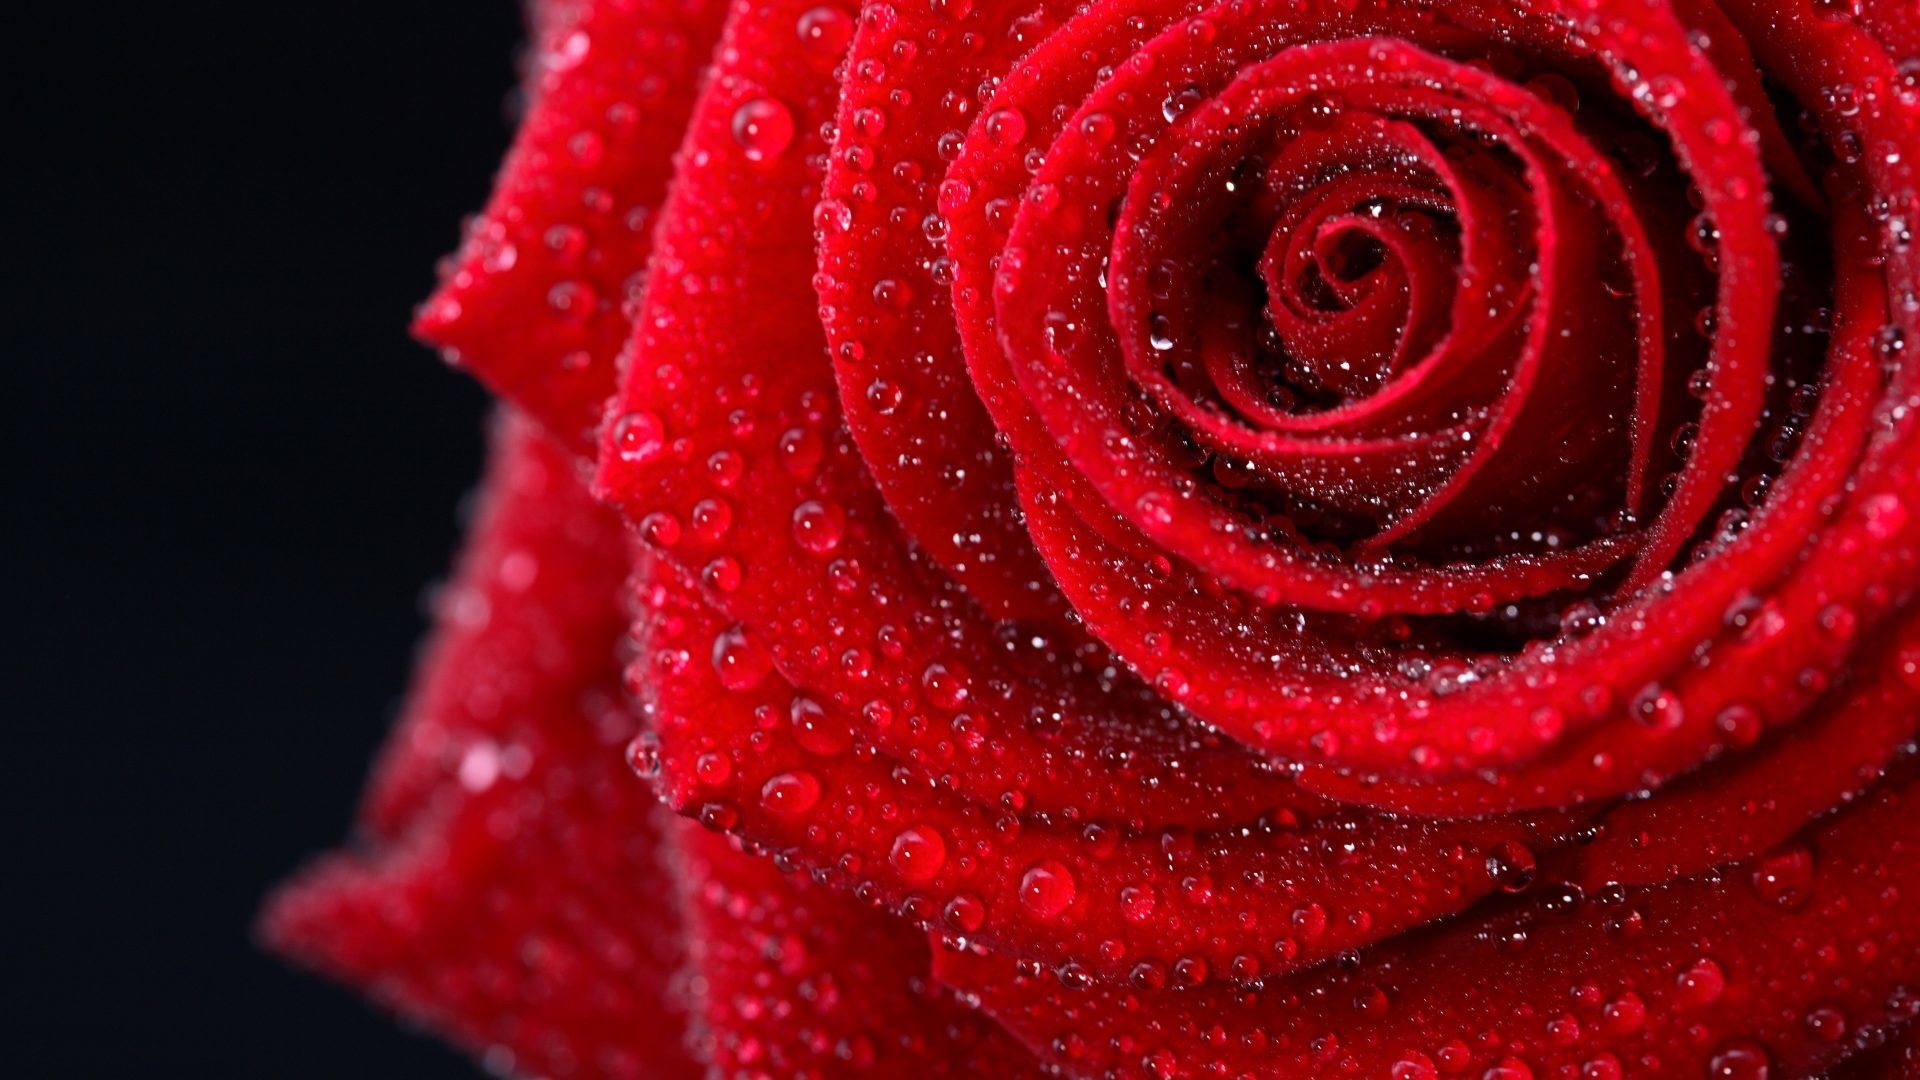 1920x1080 Flower - Rose Photography Great Romantic Red Flower Amazing Elegantly Drops  Wet Colors Nice Black Cool